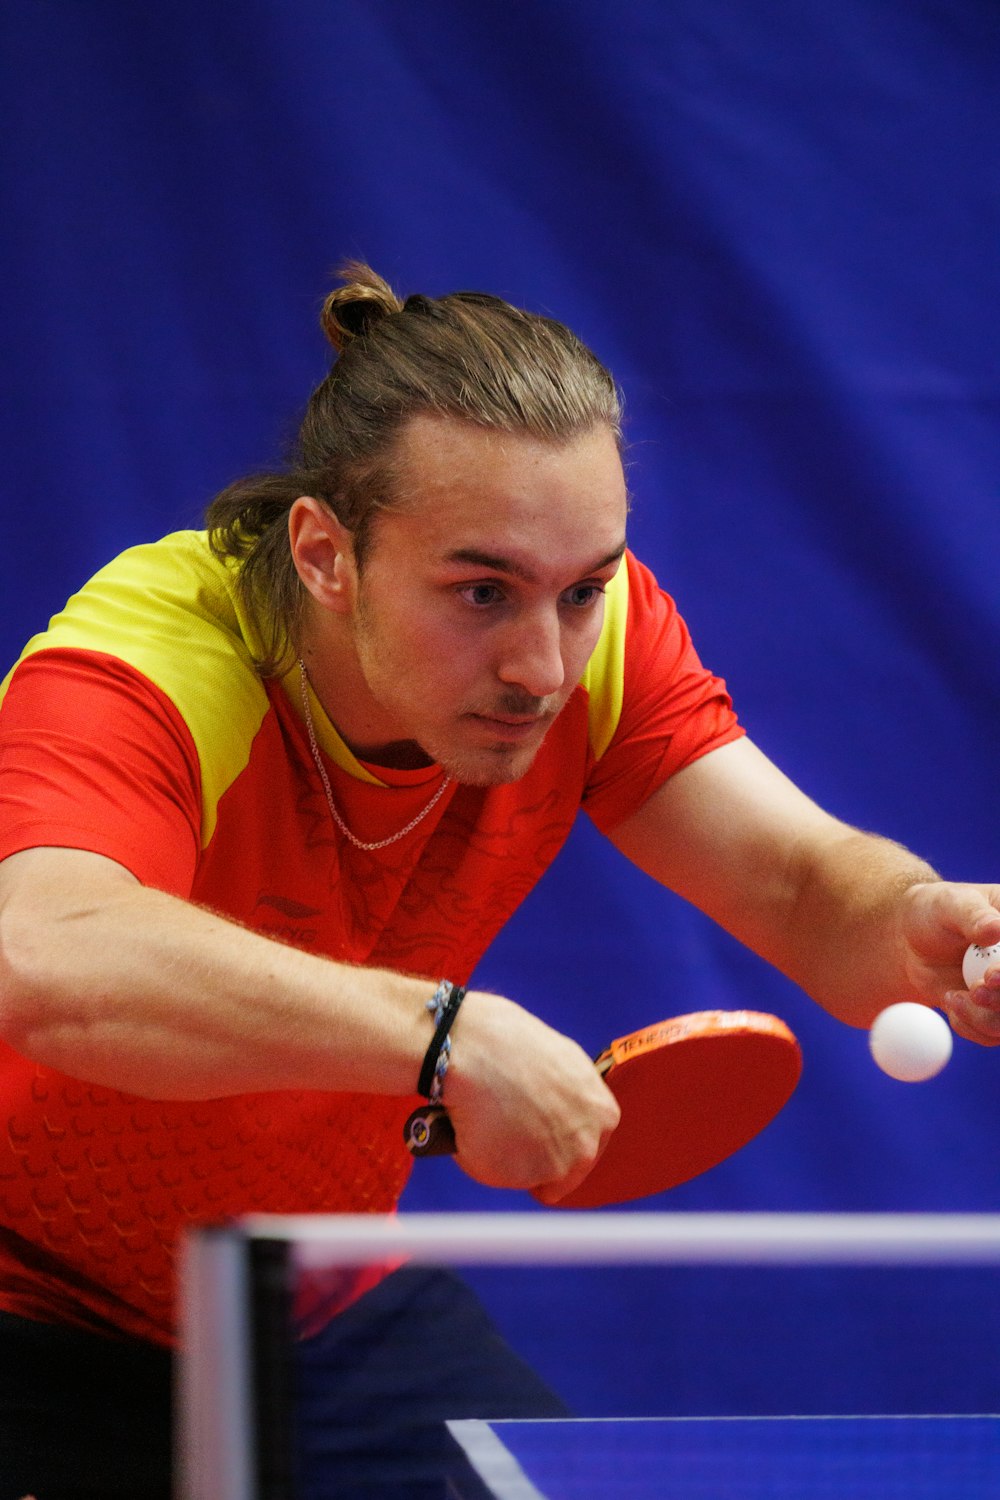 a person playing table tennis